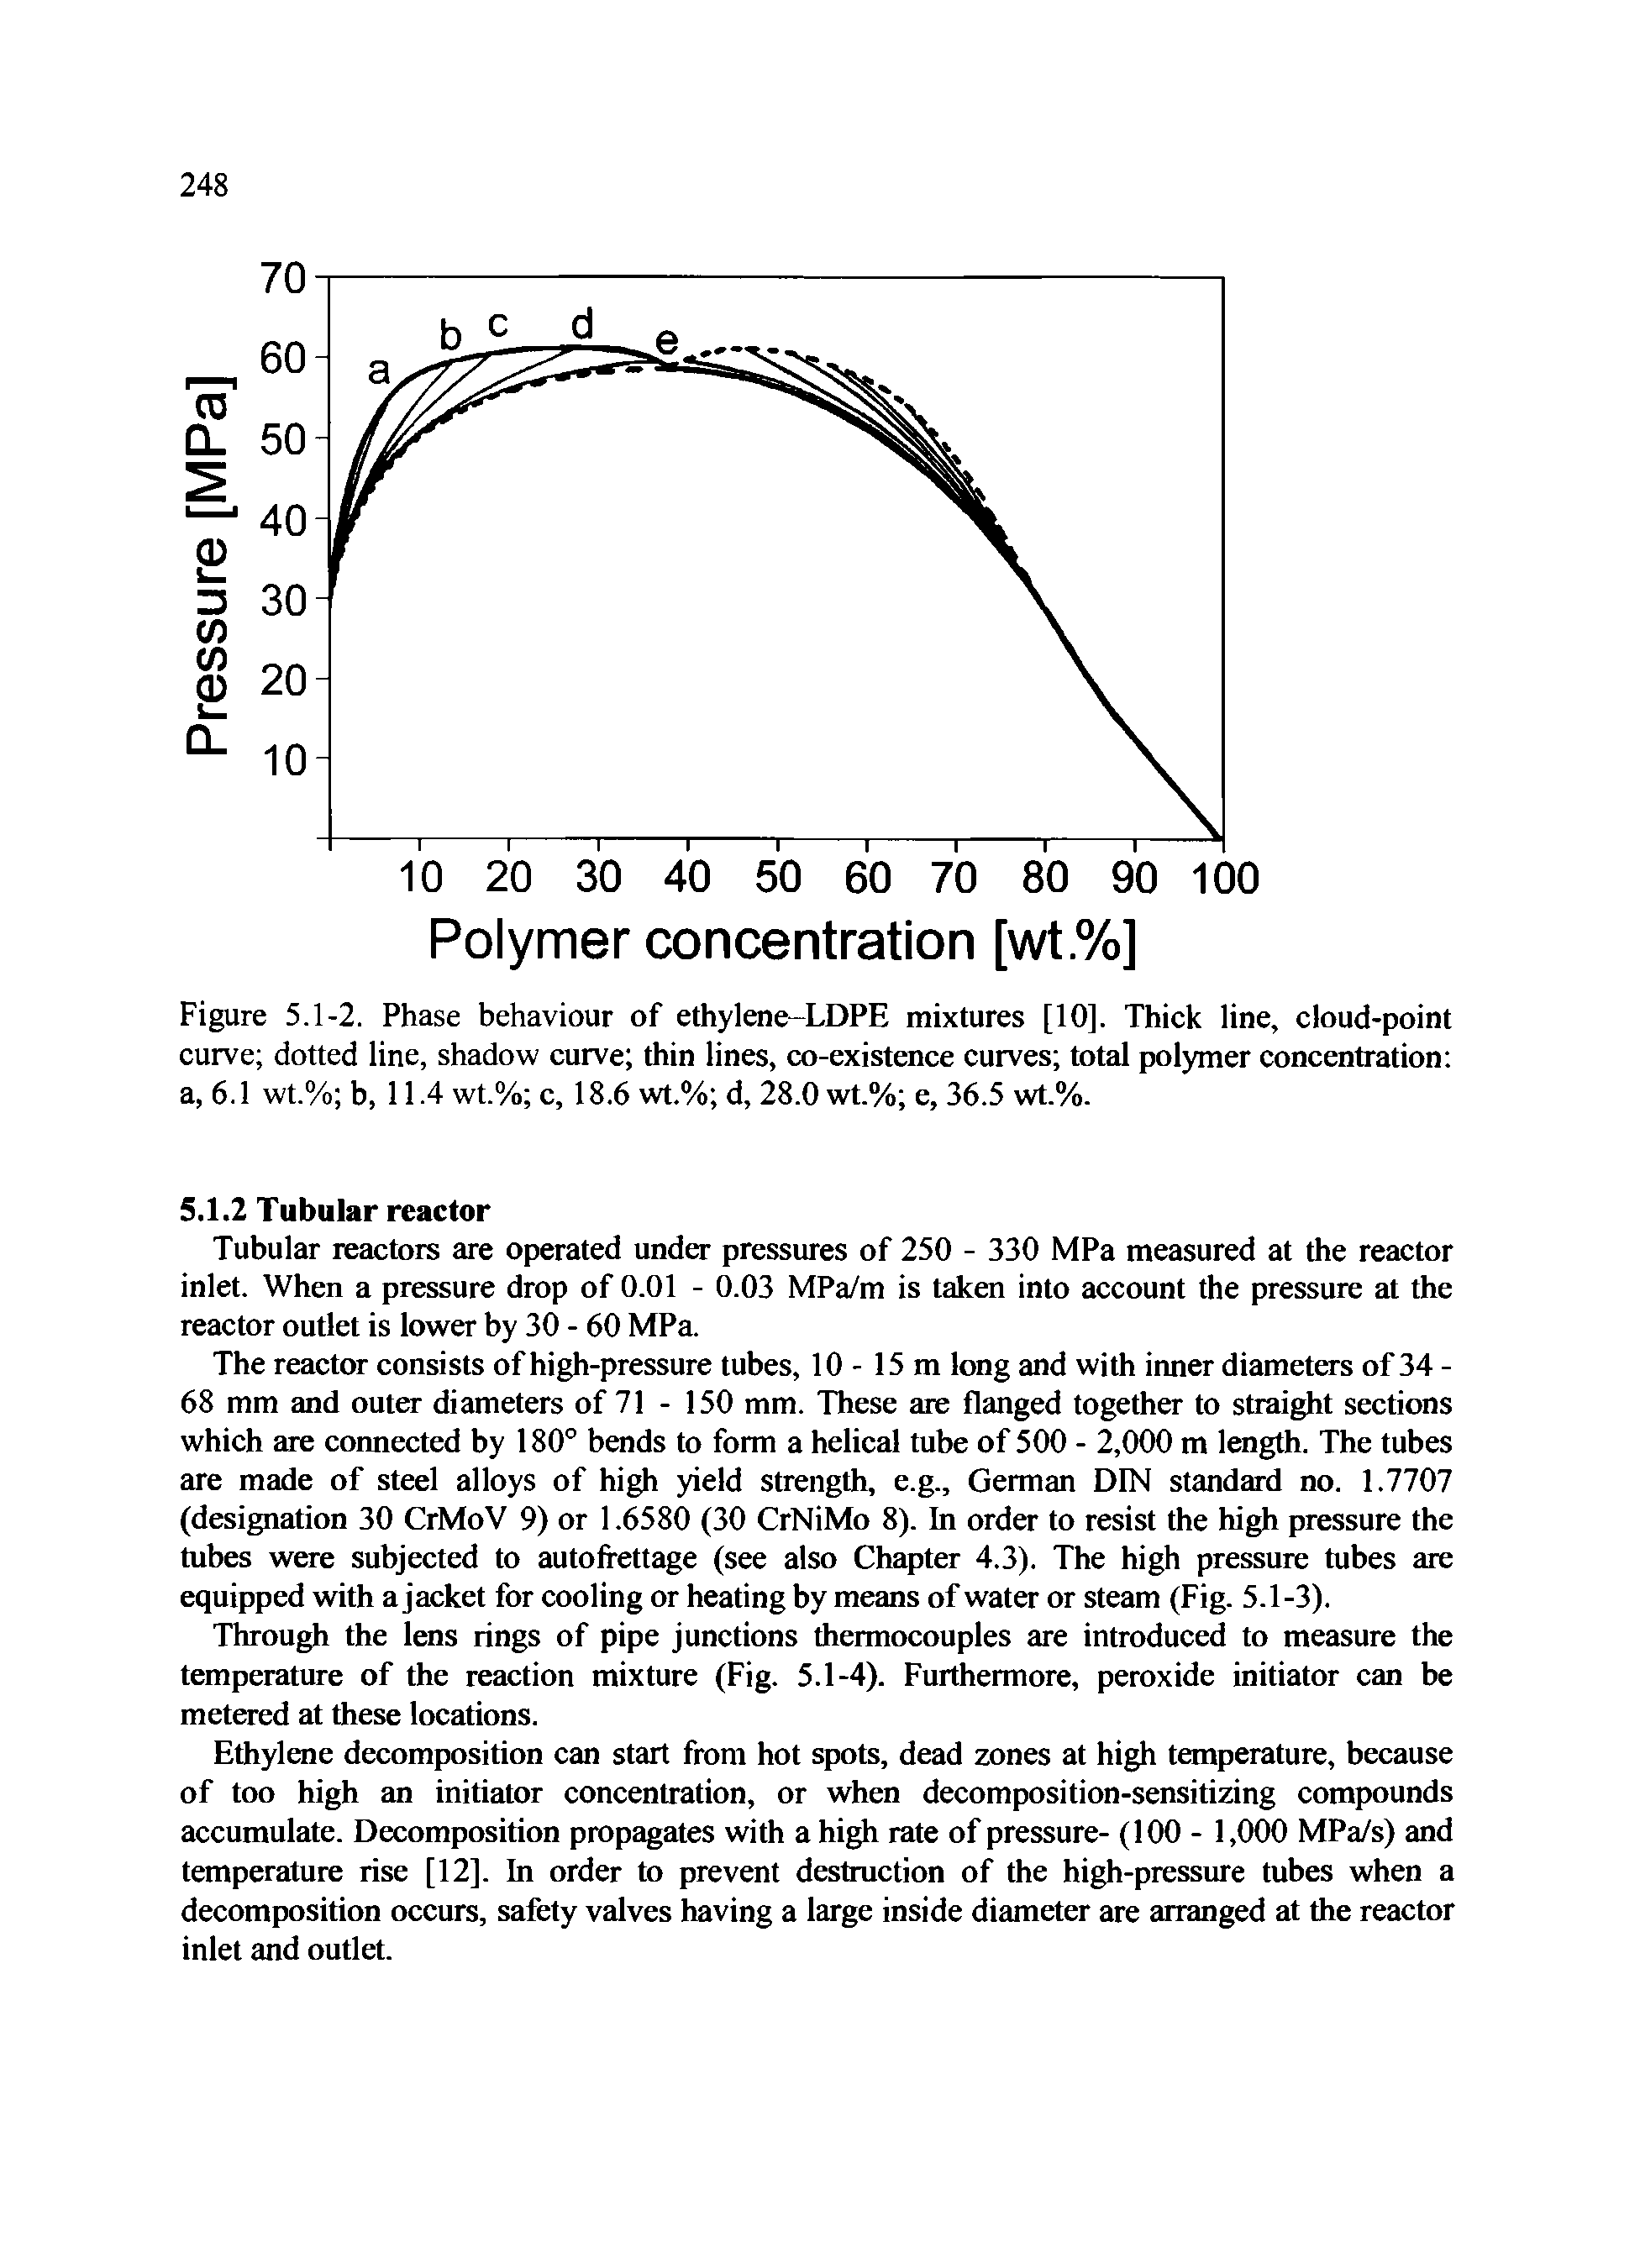 Figure 5.1-2. Phase behaviour of ethylene LDPE mixtures [10]. Thick line, cloud-point curve dotted line, shadow curve thin lines, co-existence curves total polymer concentration a, 6.1 wt.% b, 11.4 wt.% c, 18.6 wt.% d, 28.0 wt.% e, 36.5 wt.%.